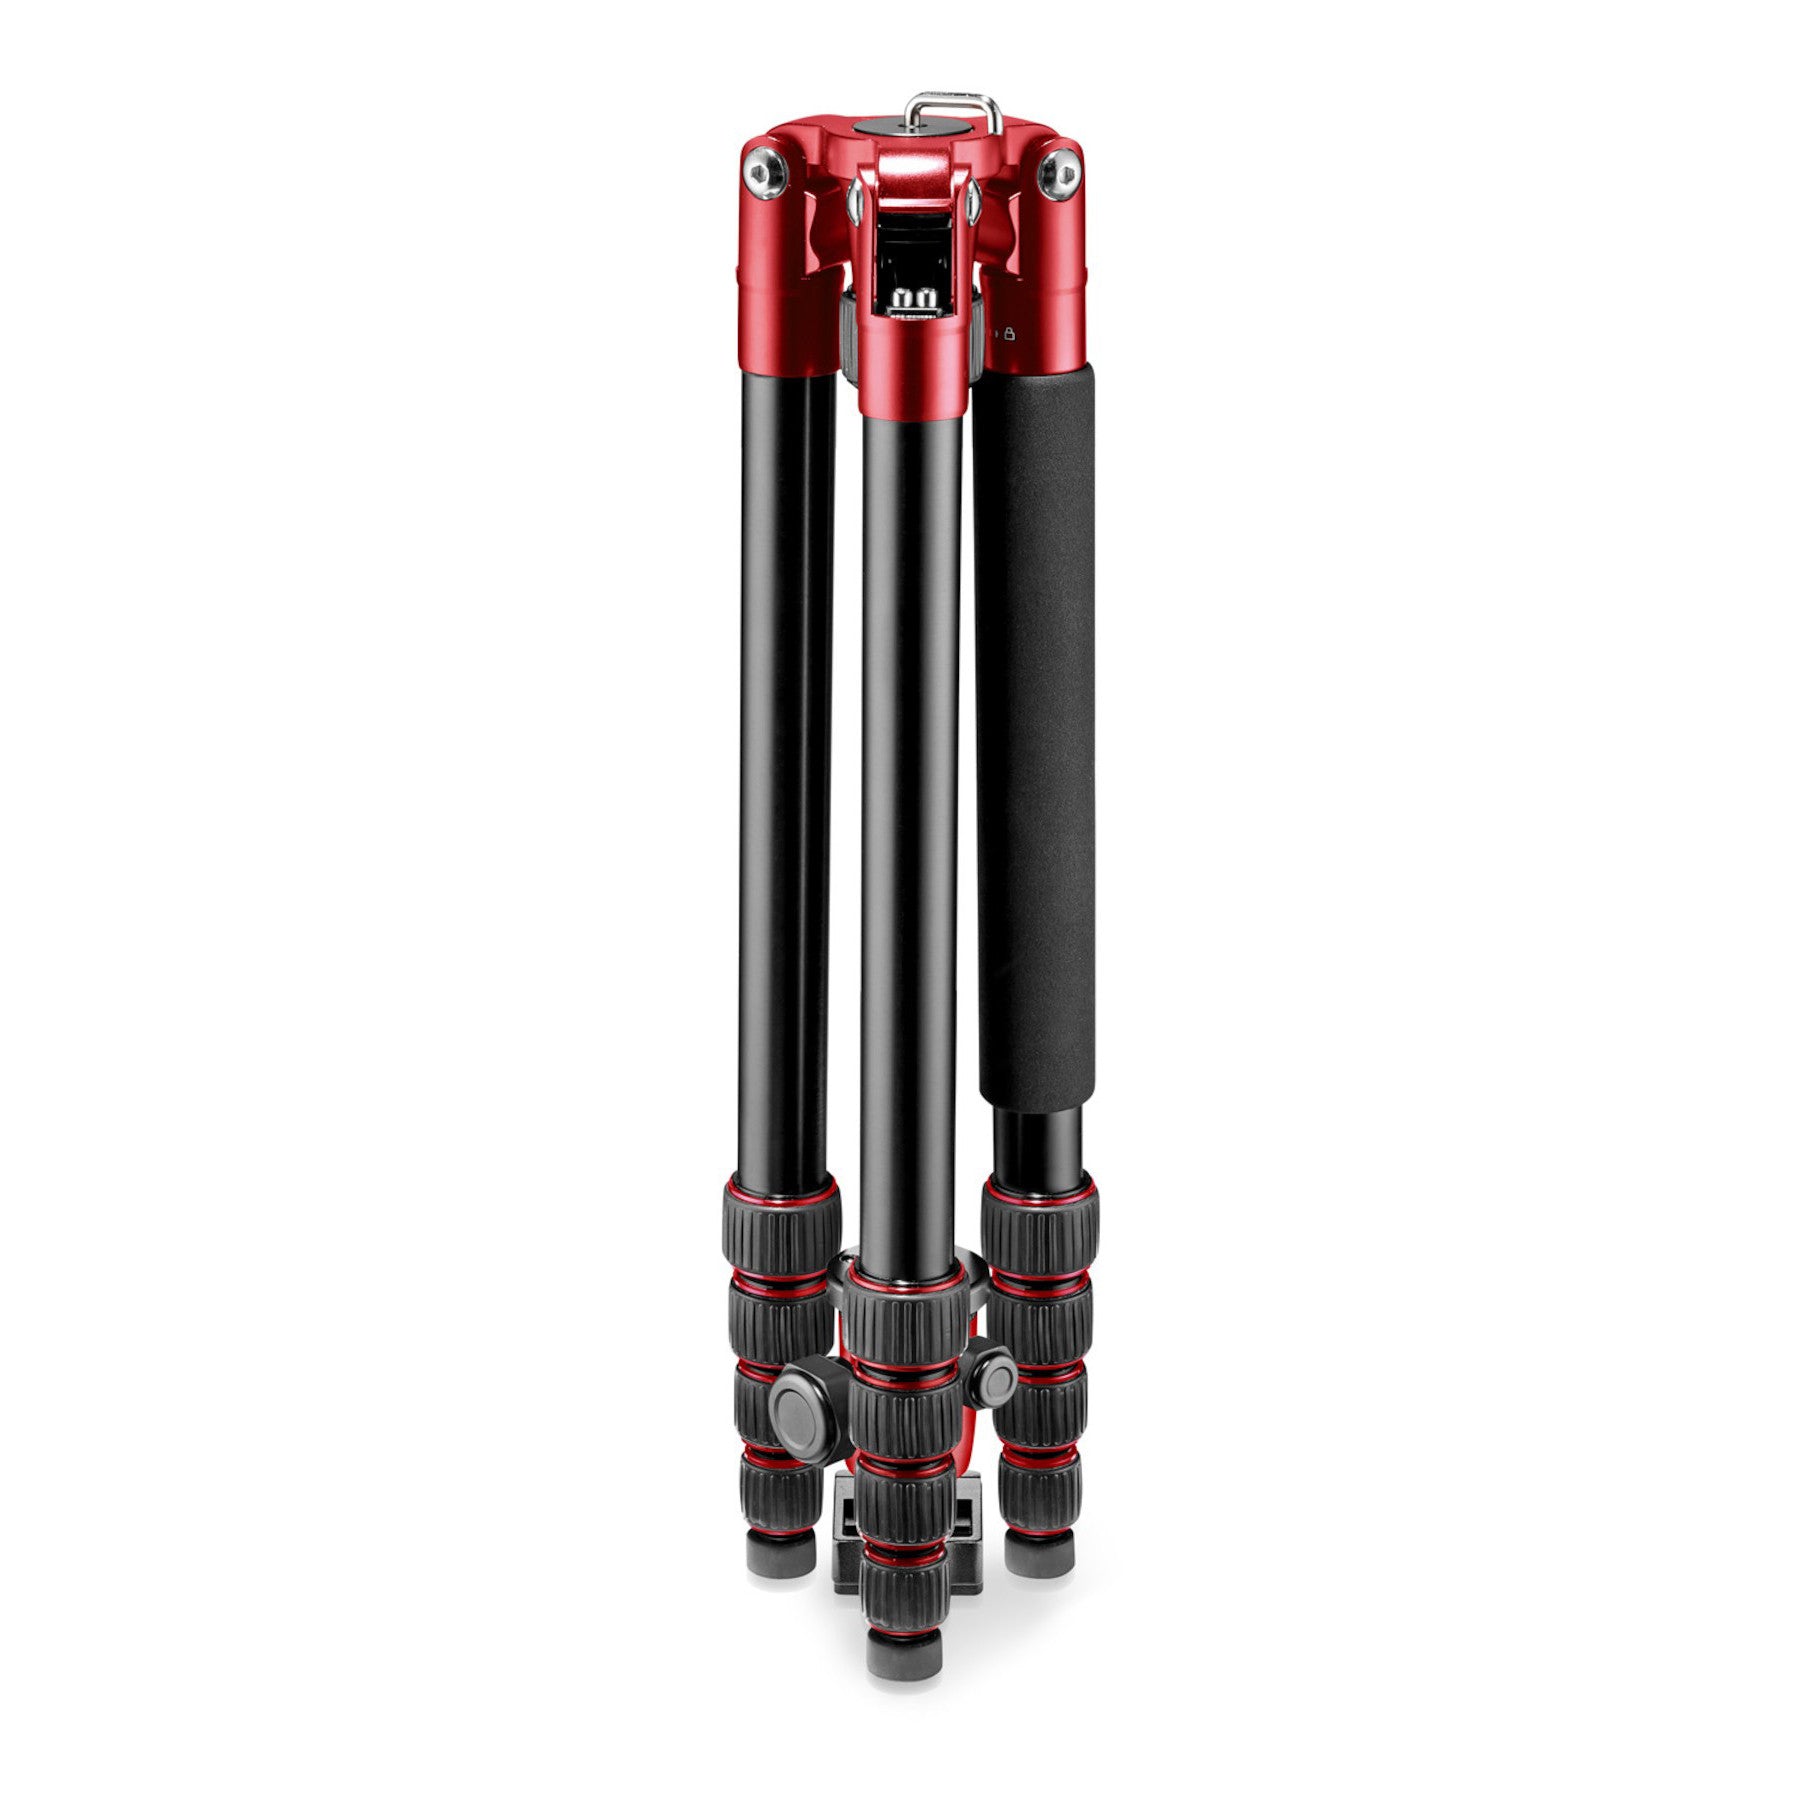 Manfrotto MKELEB5RD-BH Element Big Aluminum Traveler Tripod (Red), tripods travel & compact, Manfrotto - Pictureline  - 2